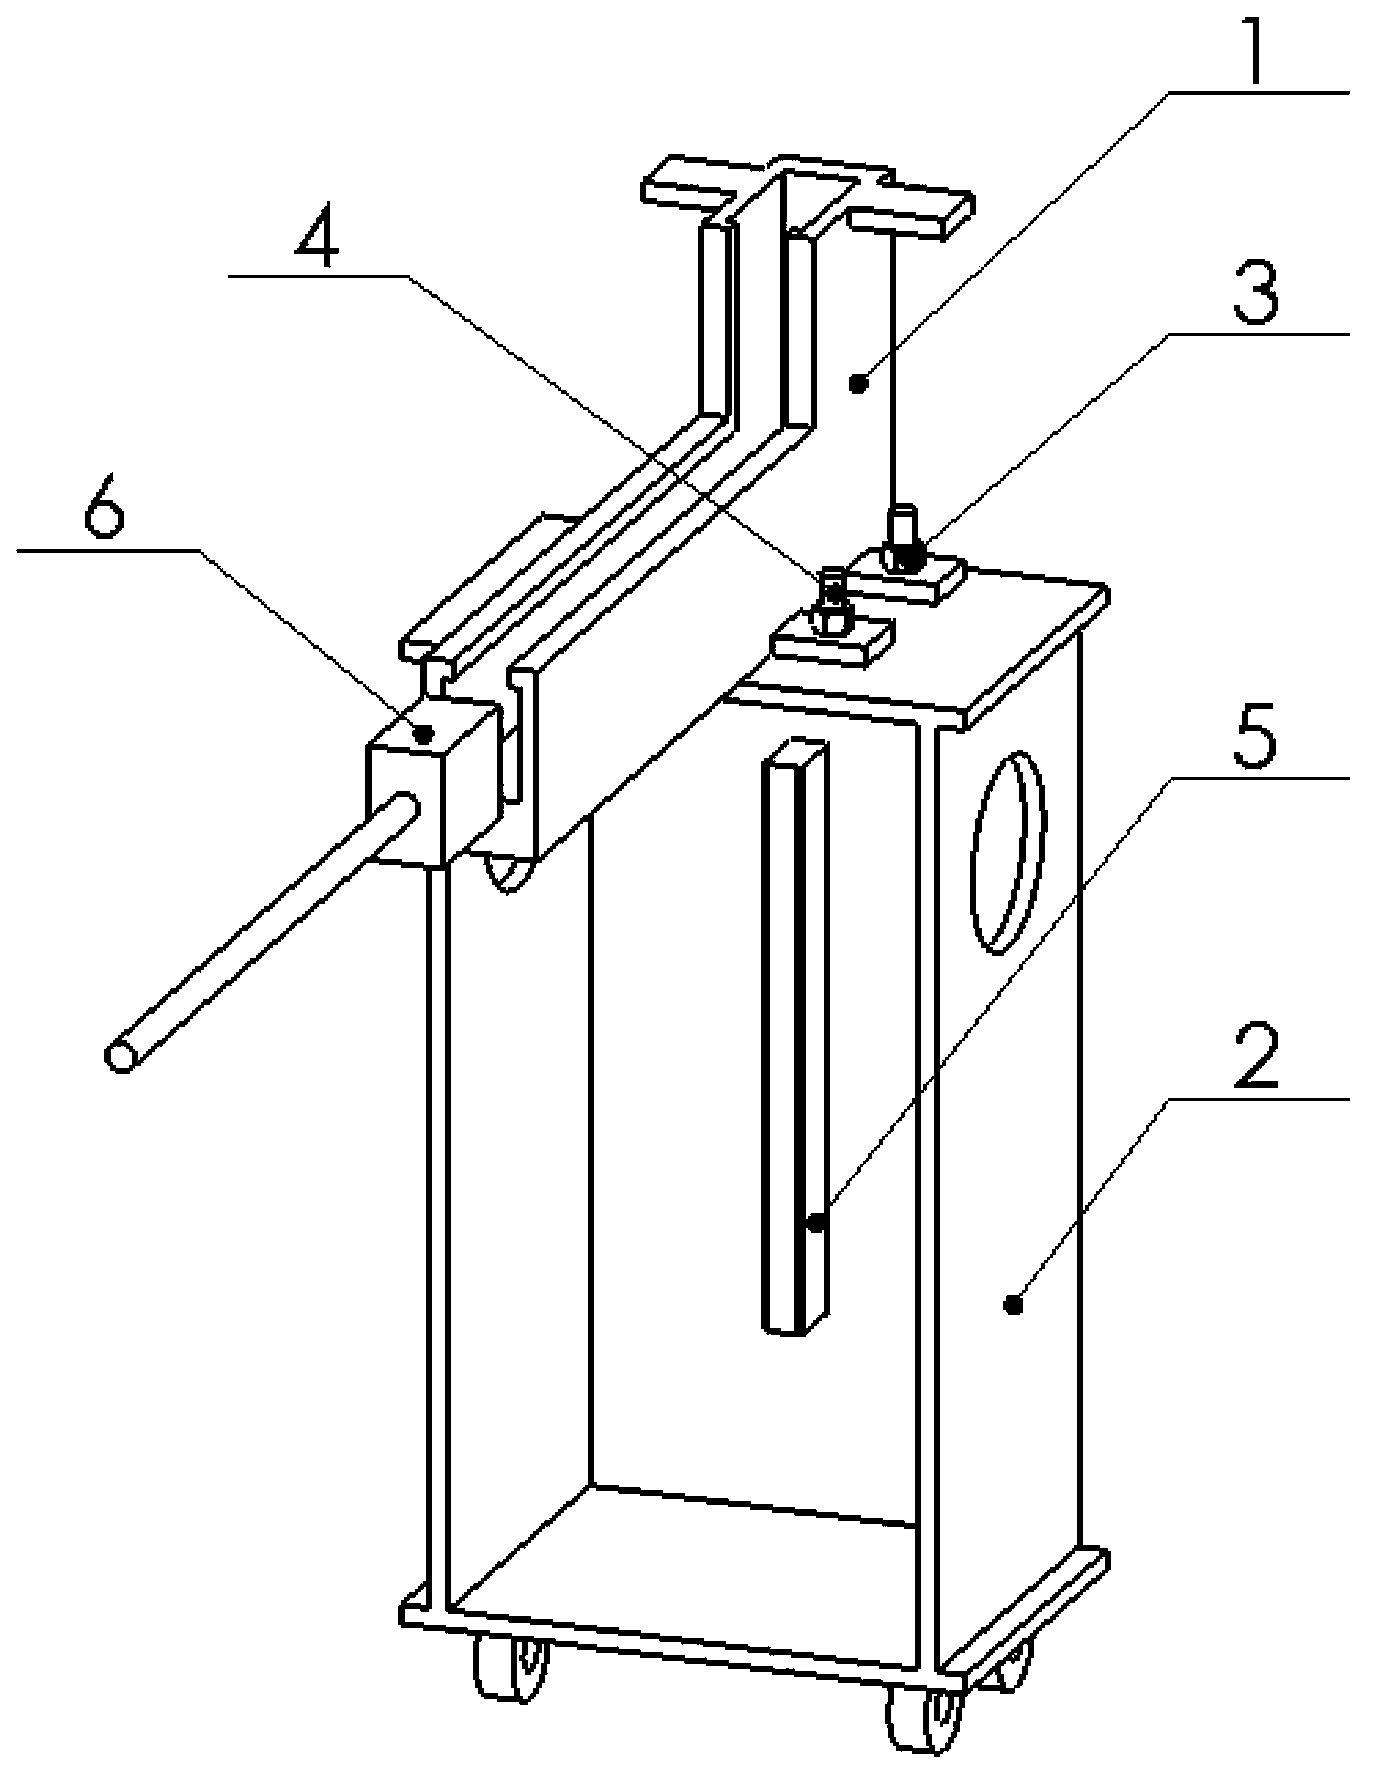 Permanent magnet assembly fixture for large permanent magnet direct-driven wind generator and assembly method of permanent magnet assembly fixture